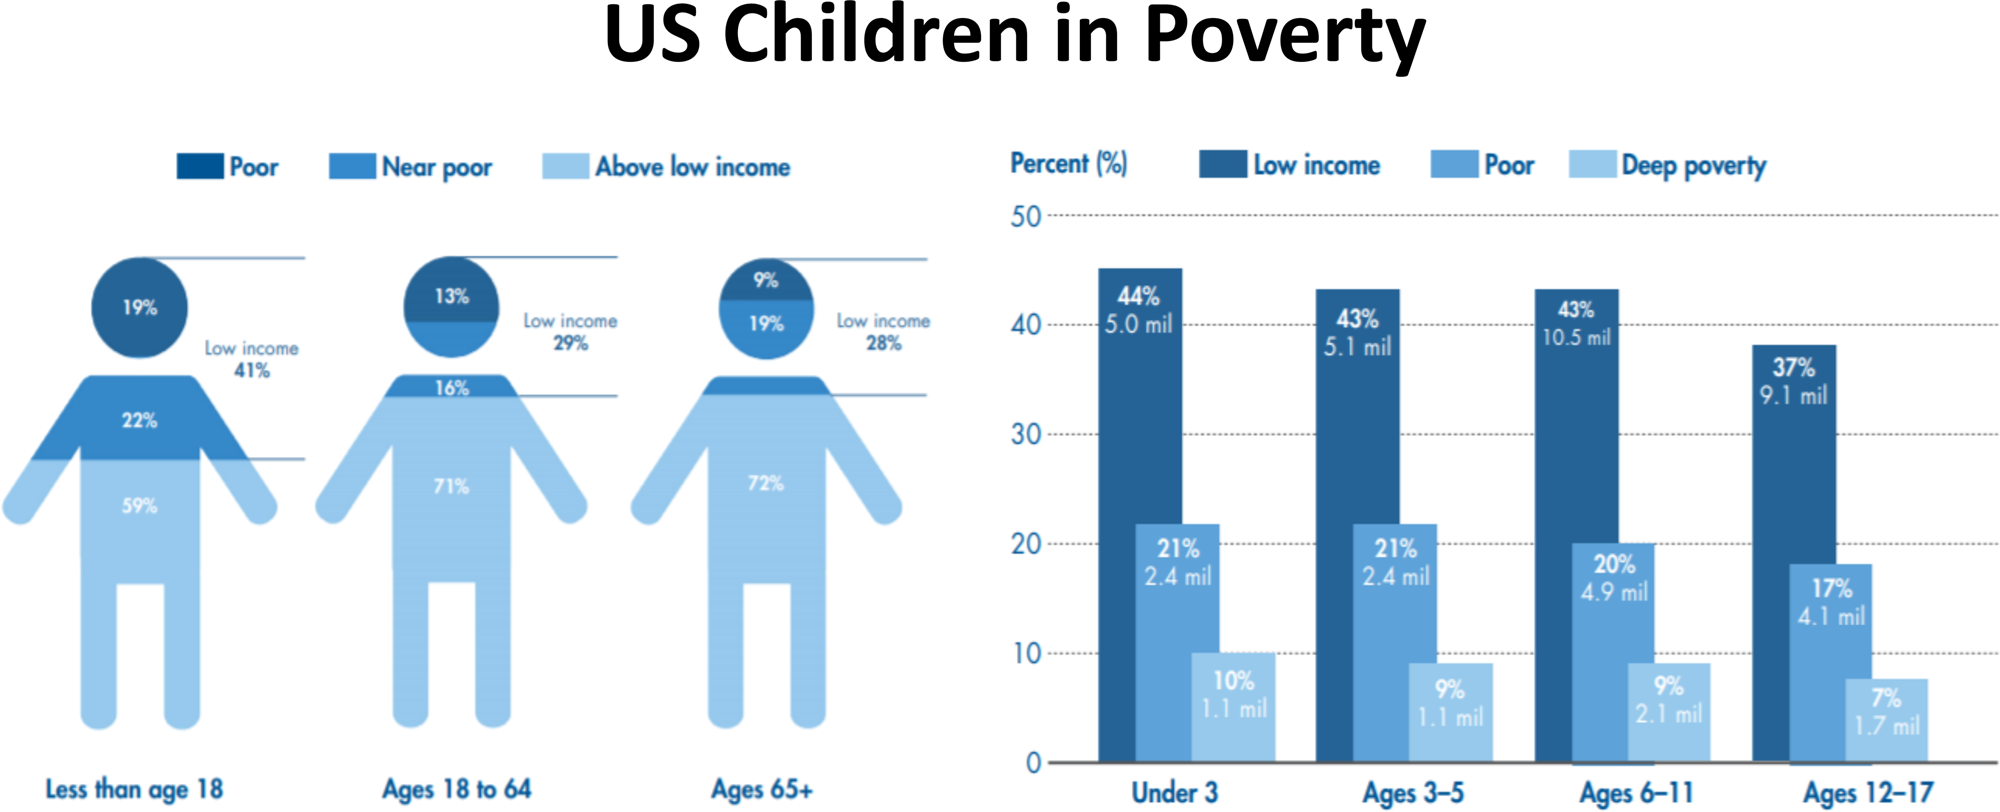 Basic Facts About Low-income Children: Children Aged 12 through 17 Years,  2013 – NCCP